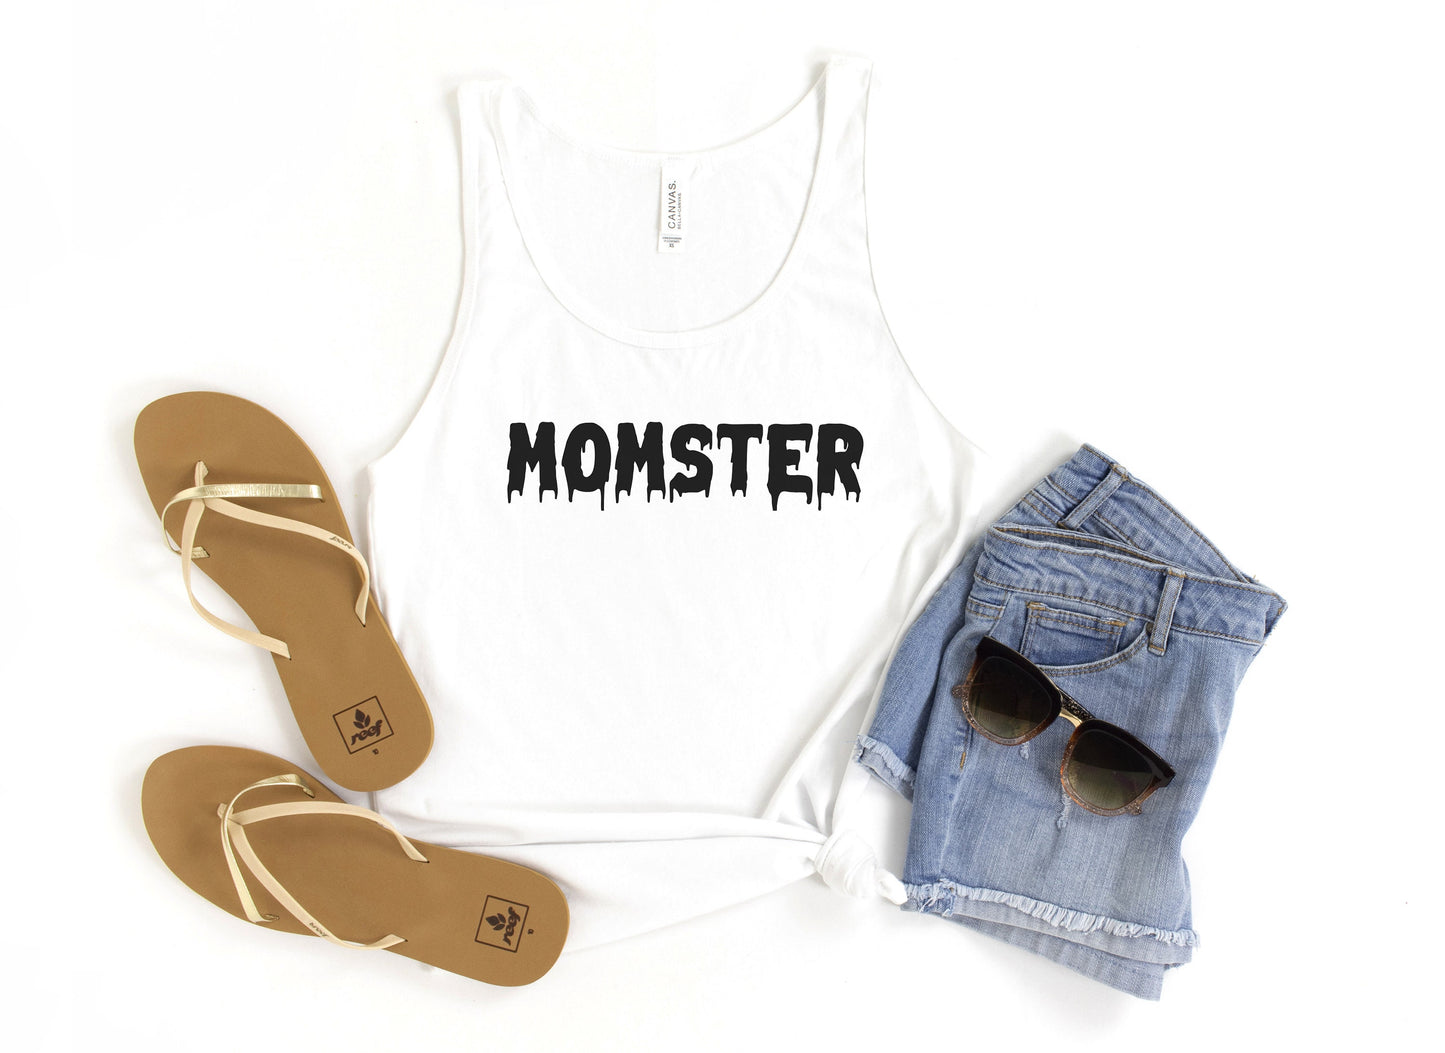 Momster Tank Top